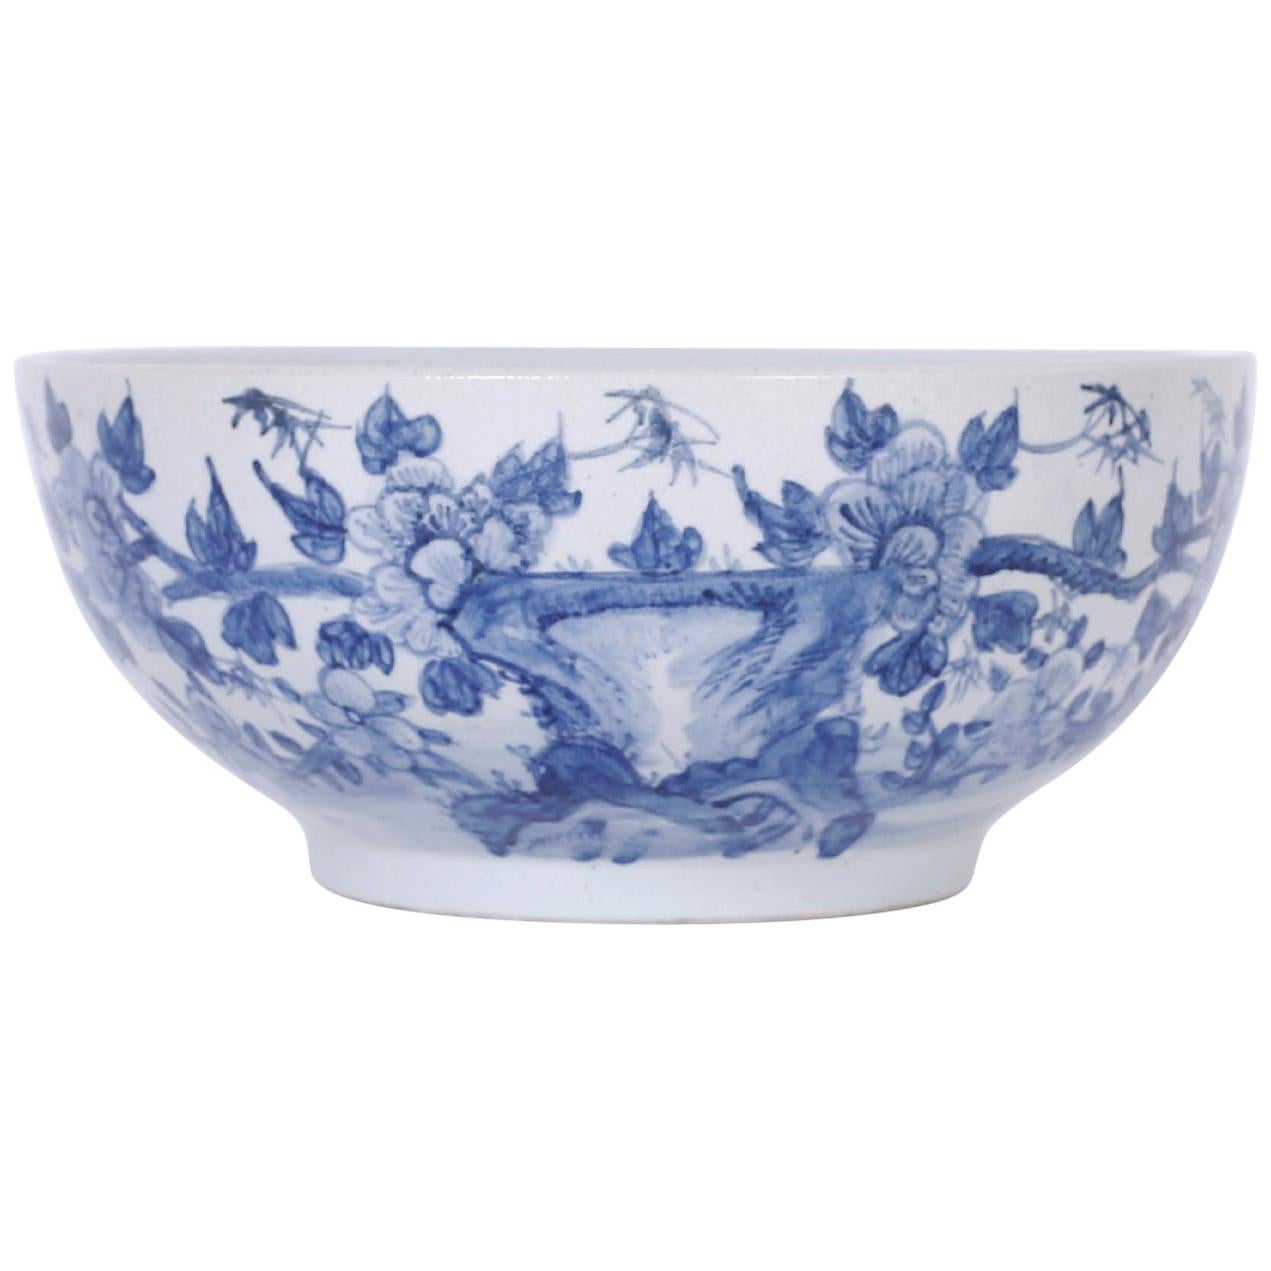 Large Blue and White Chinese Porcelain Bowl